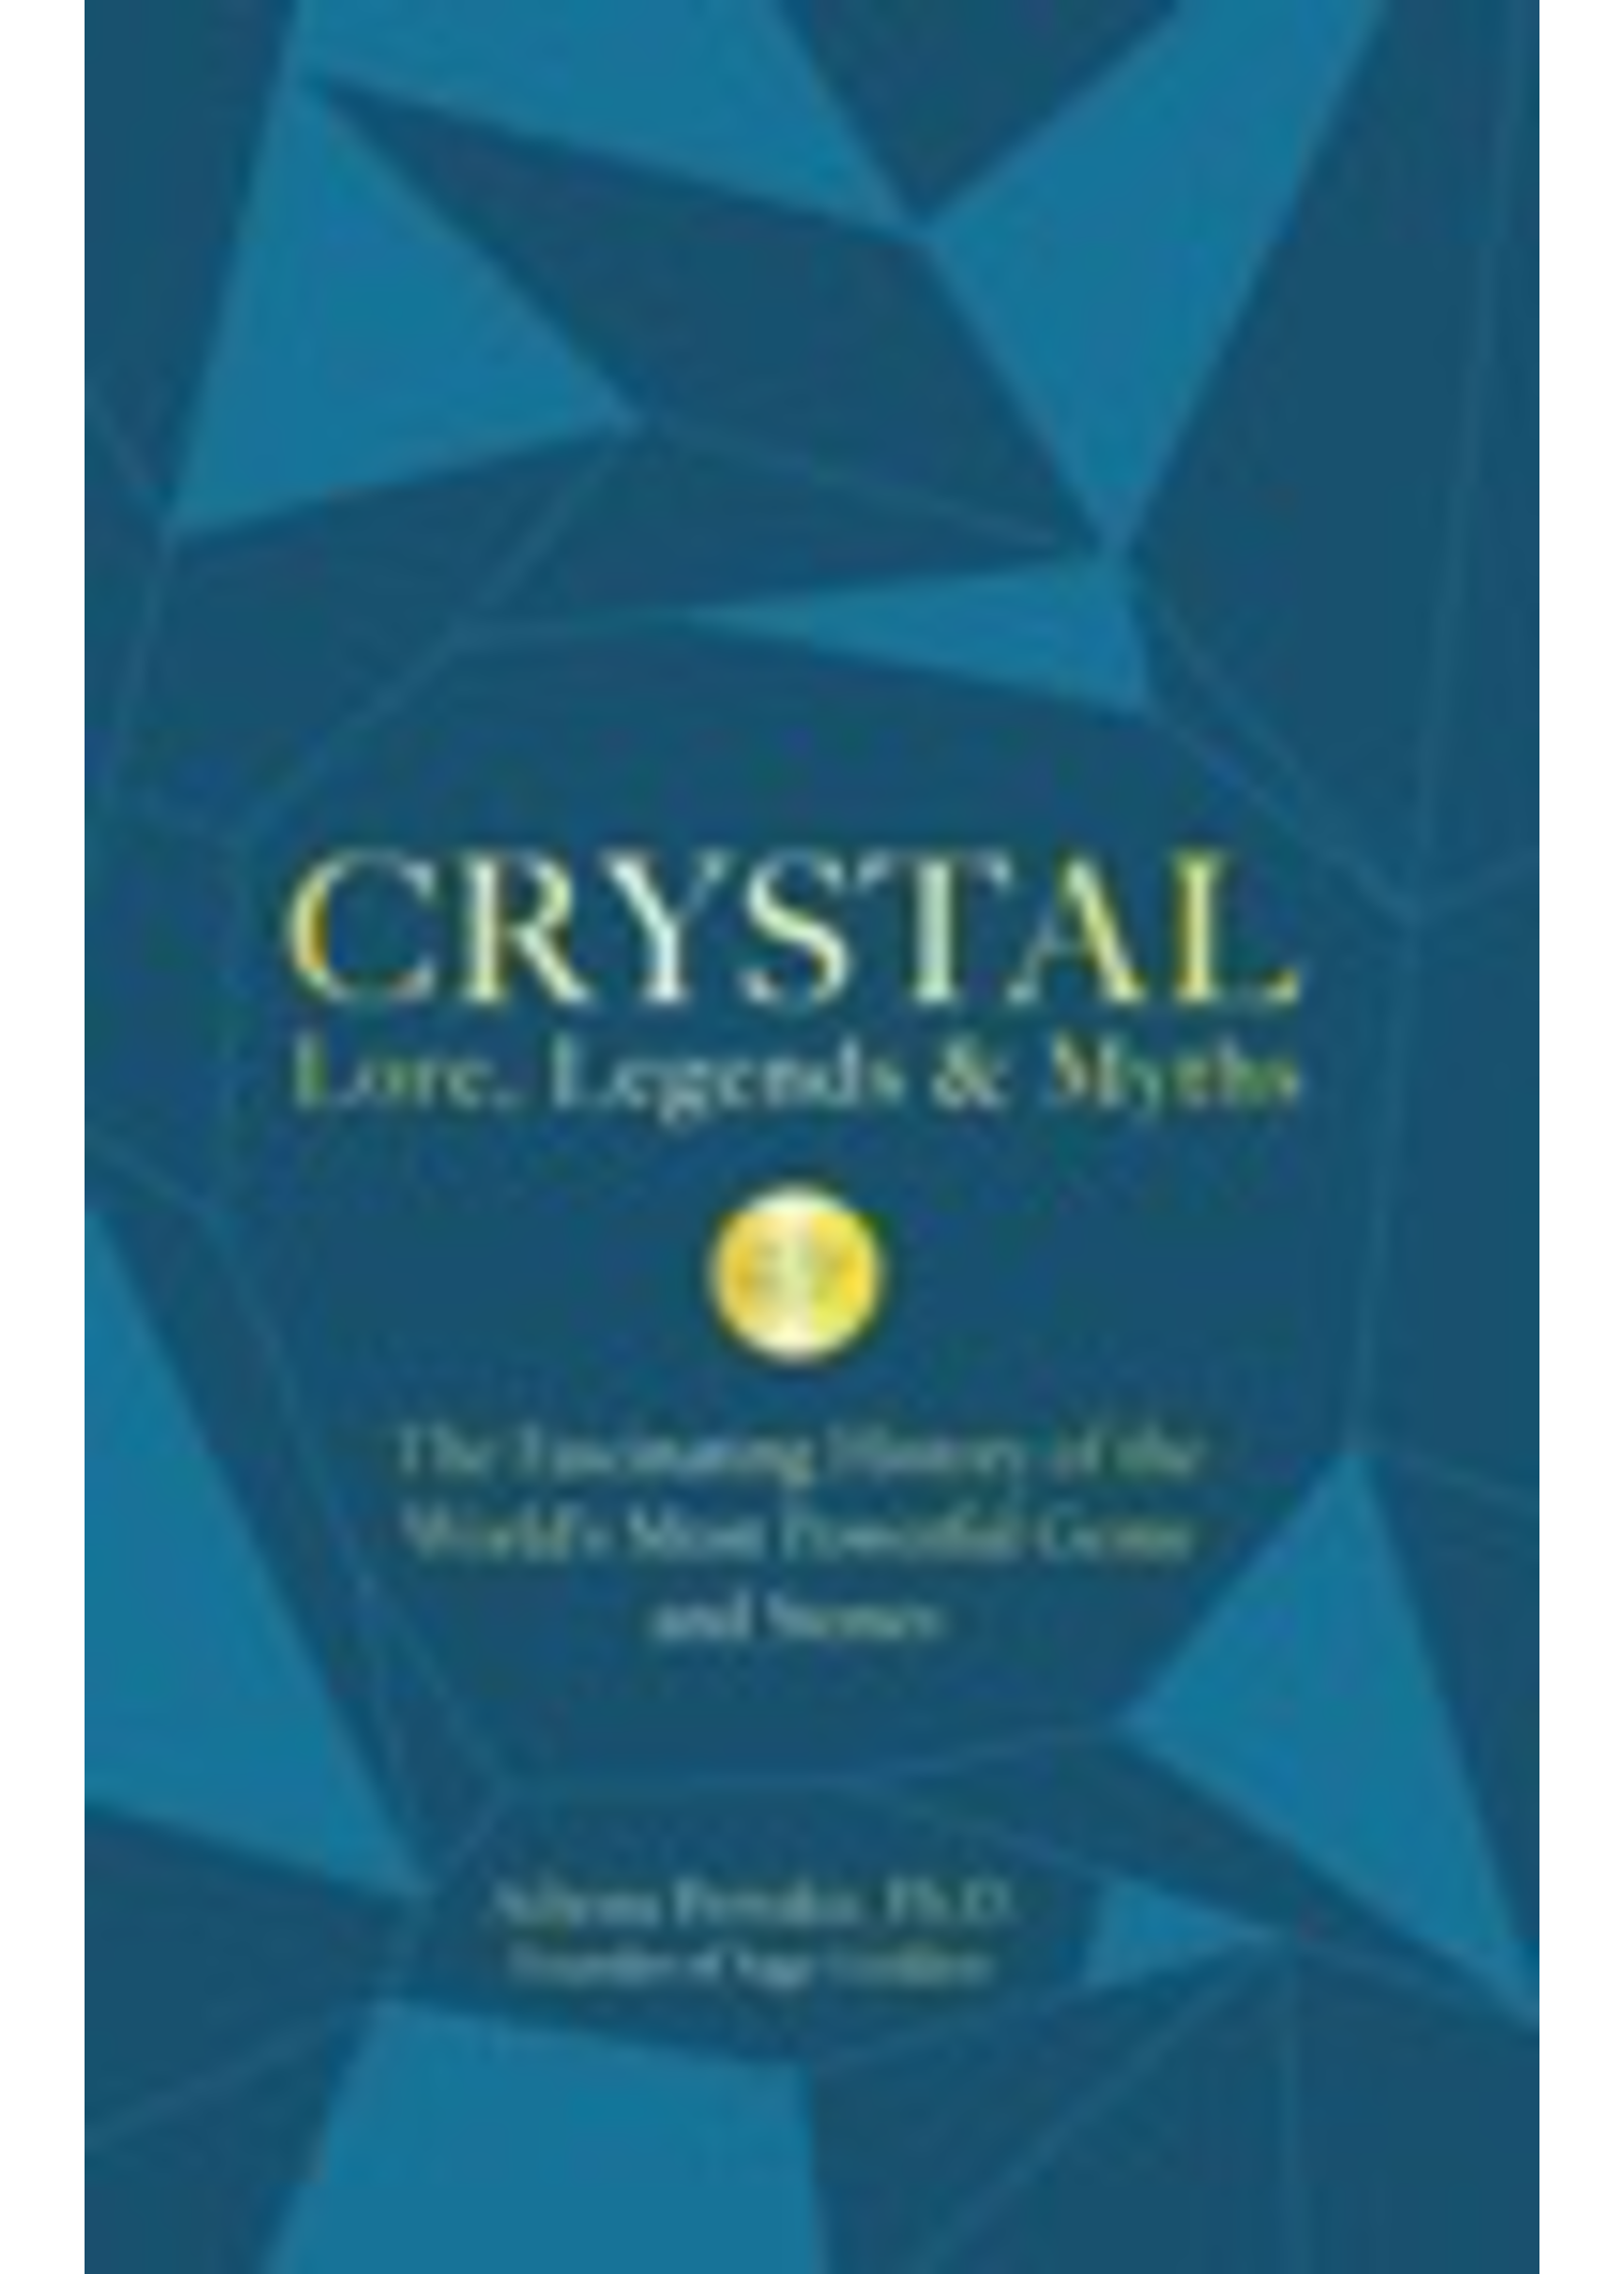 Crystal Lore, Legends and Myths